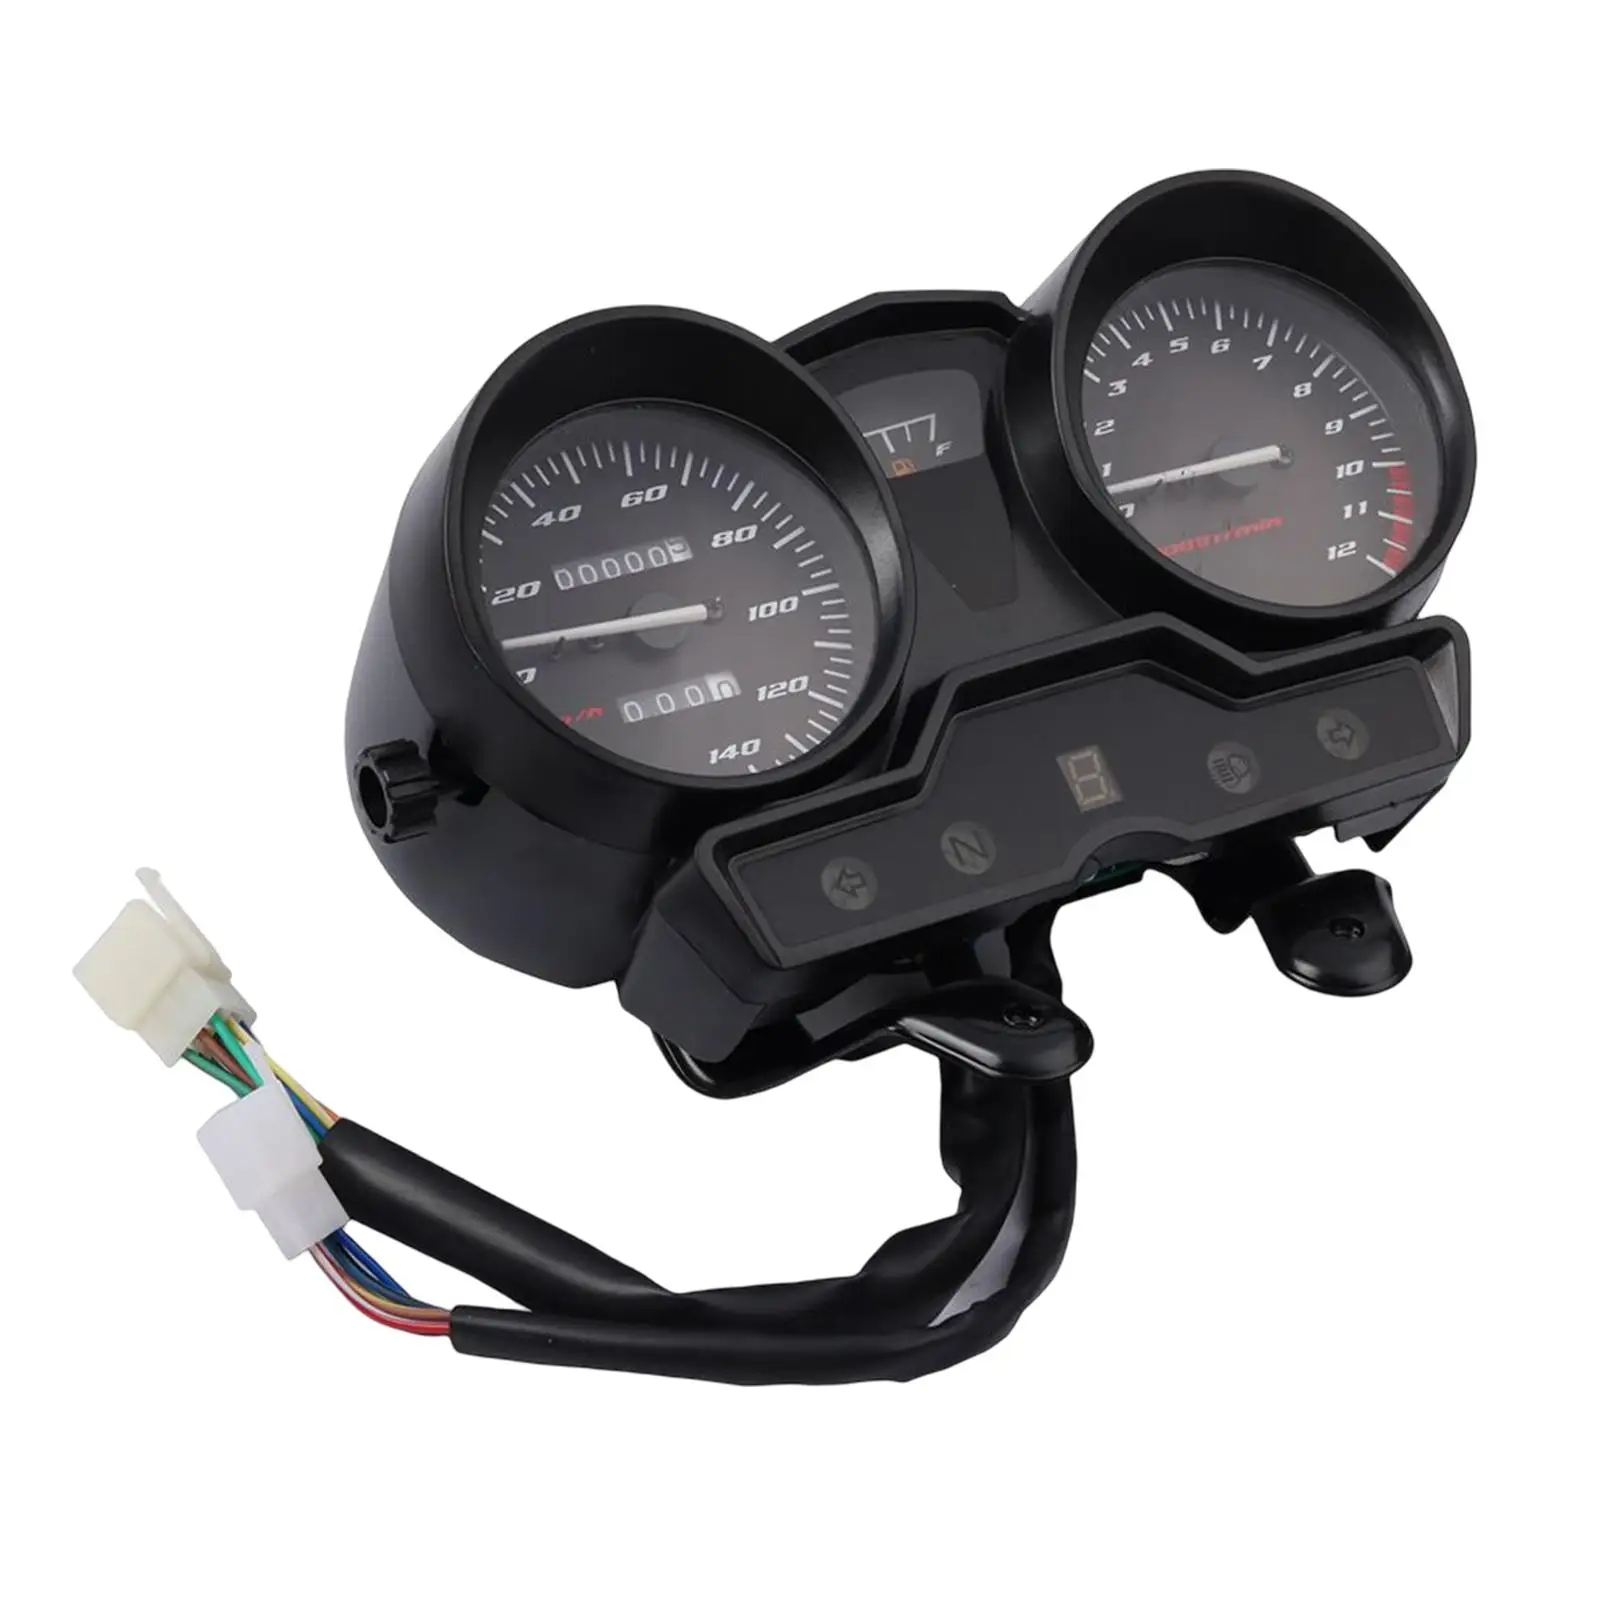 LED Digital Dashboard Odometer Motorbike Parts with Gear Display Meter Accessories Easy to Install Car Accessories Spare Parts